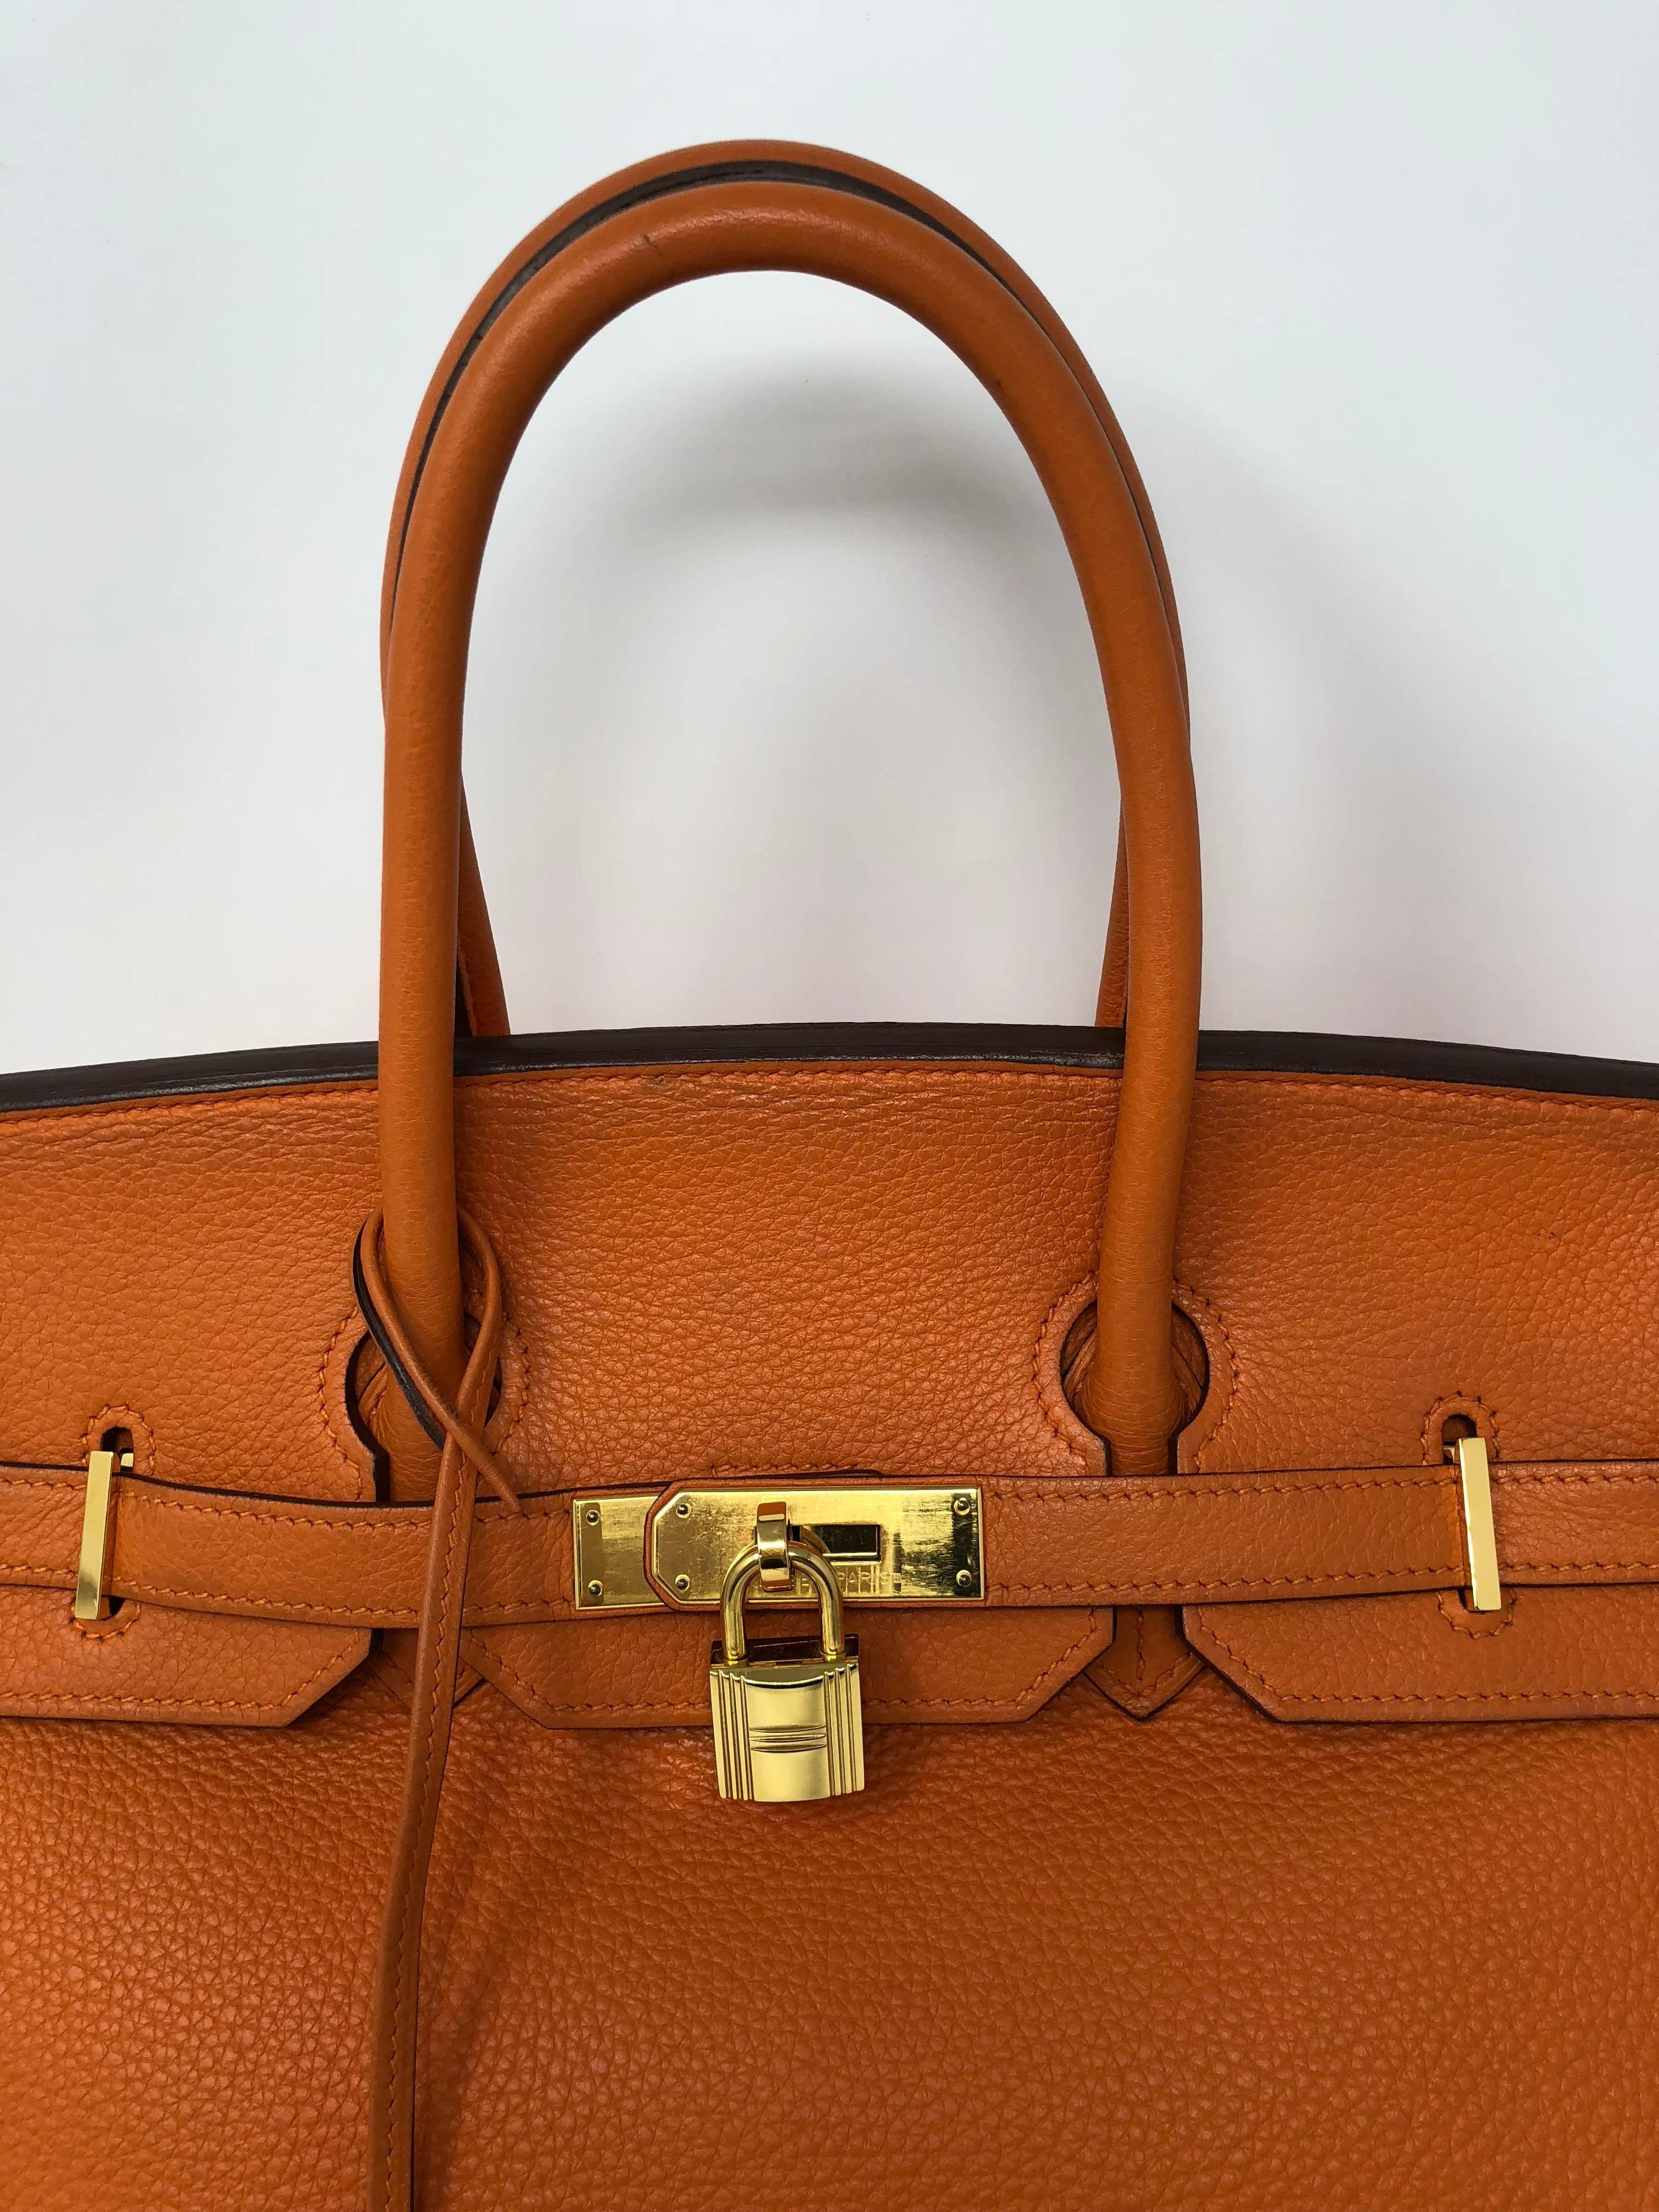 Hermes Birkin Orange 35 with gold hardware. From 2010 (N square) Comes with clochette, keys, and dust cover. Guaranteed authentic. Good condition. 